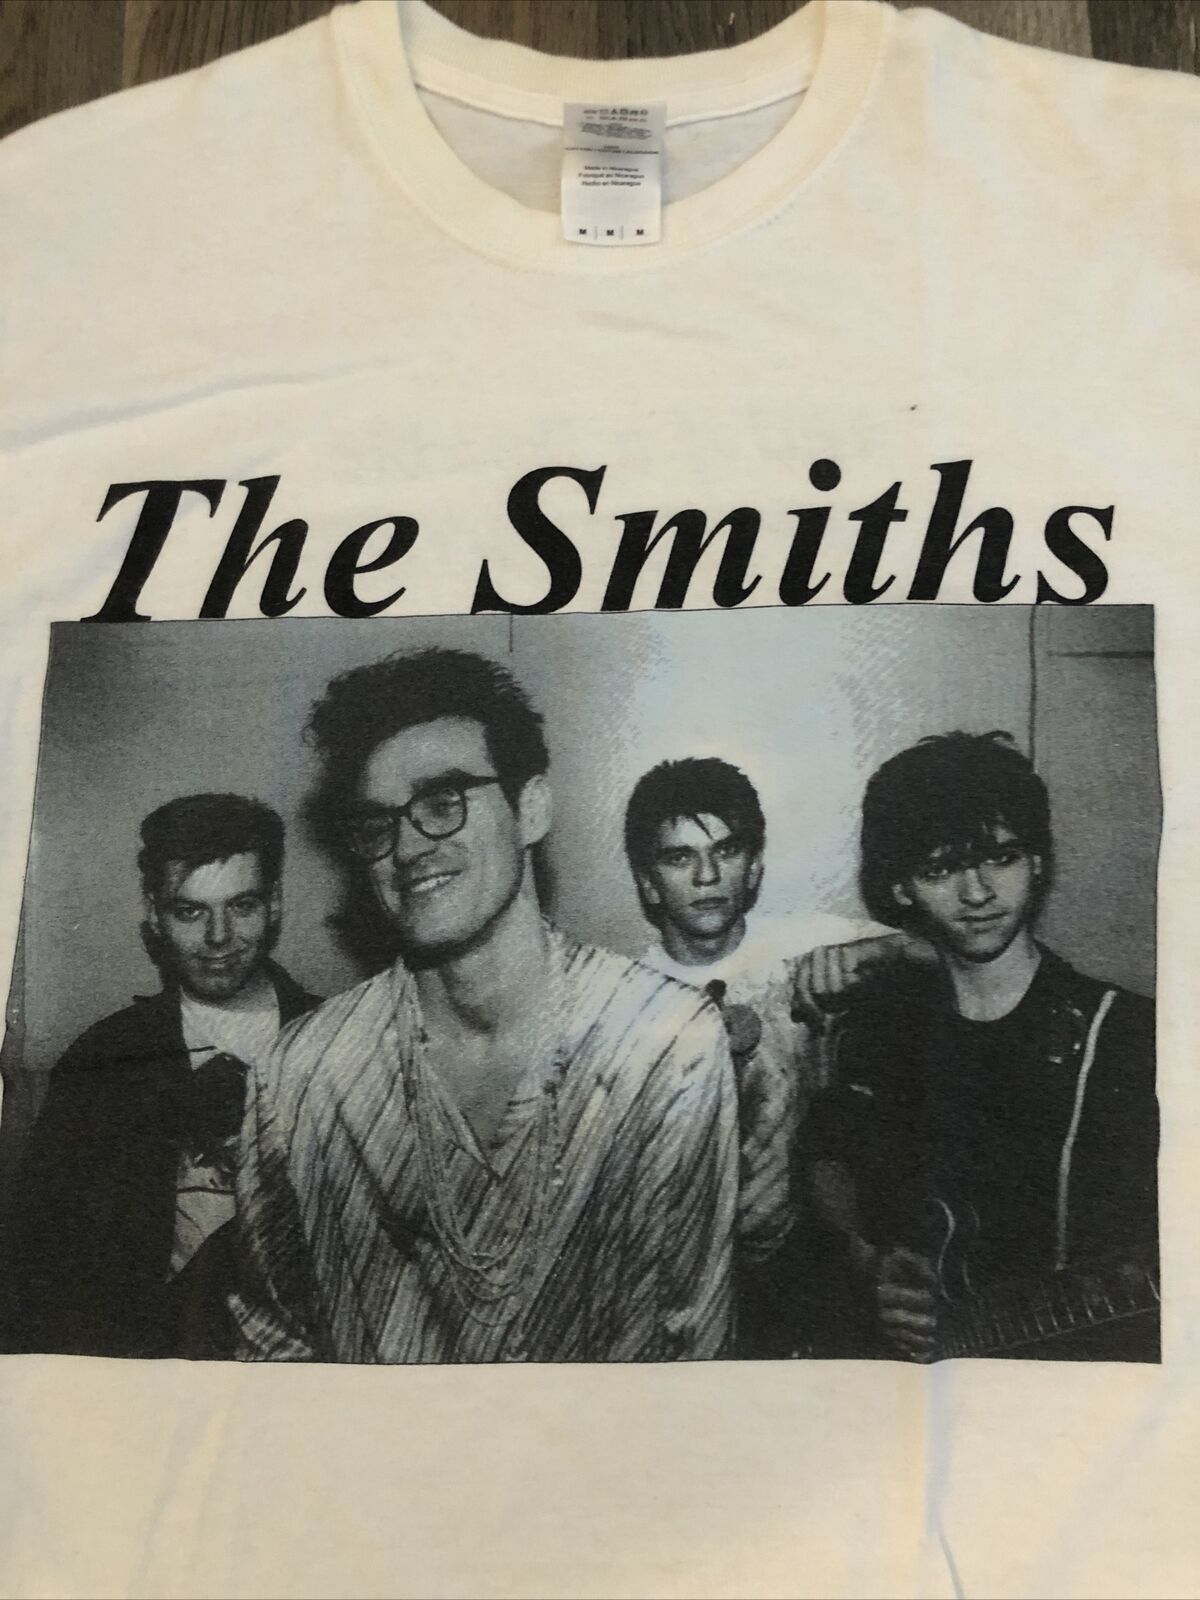 The Smiths - image 12